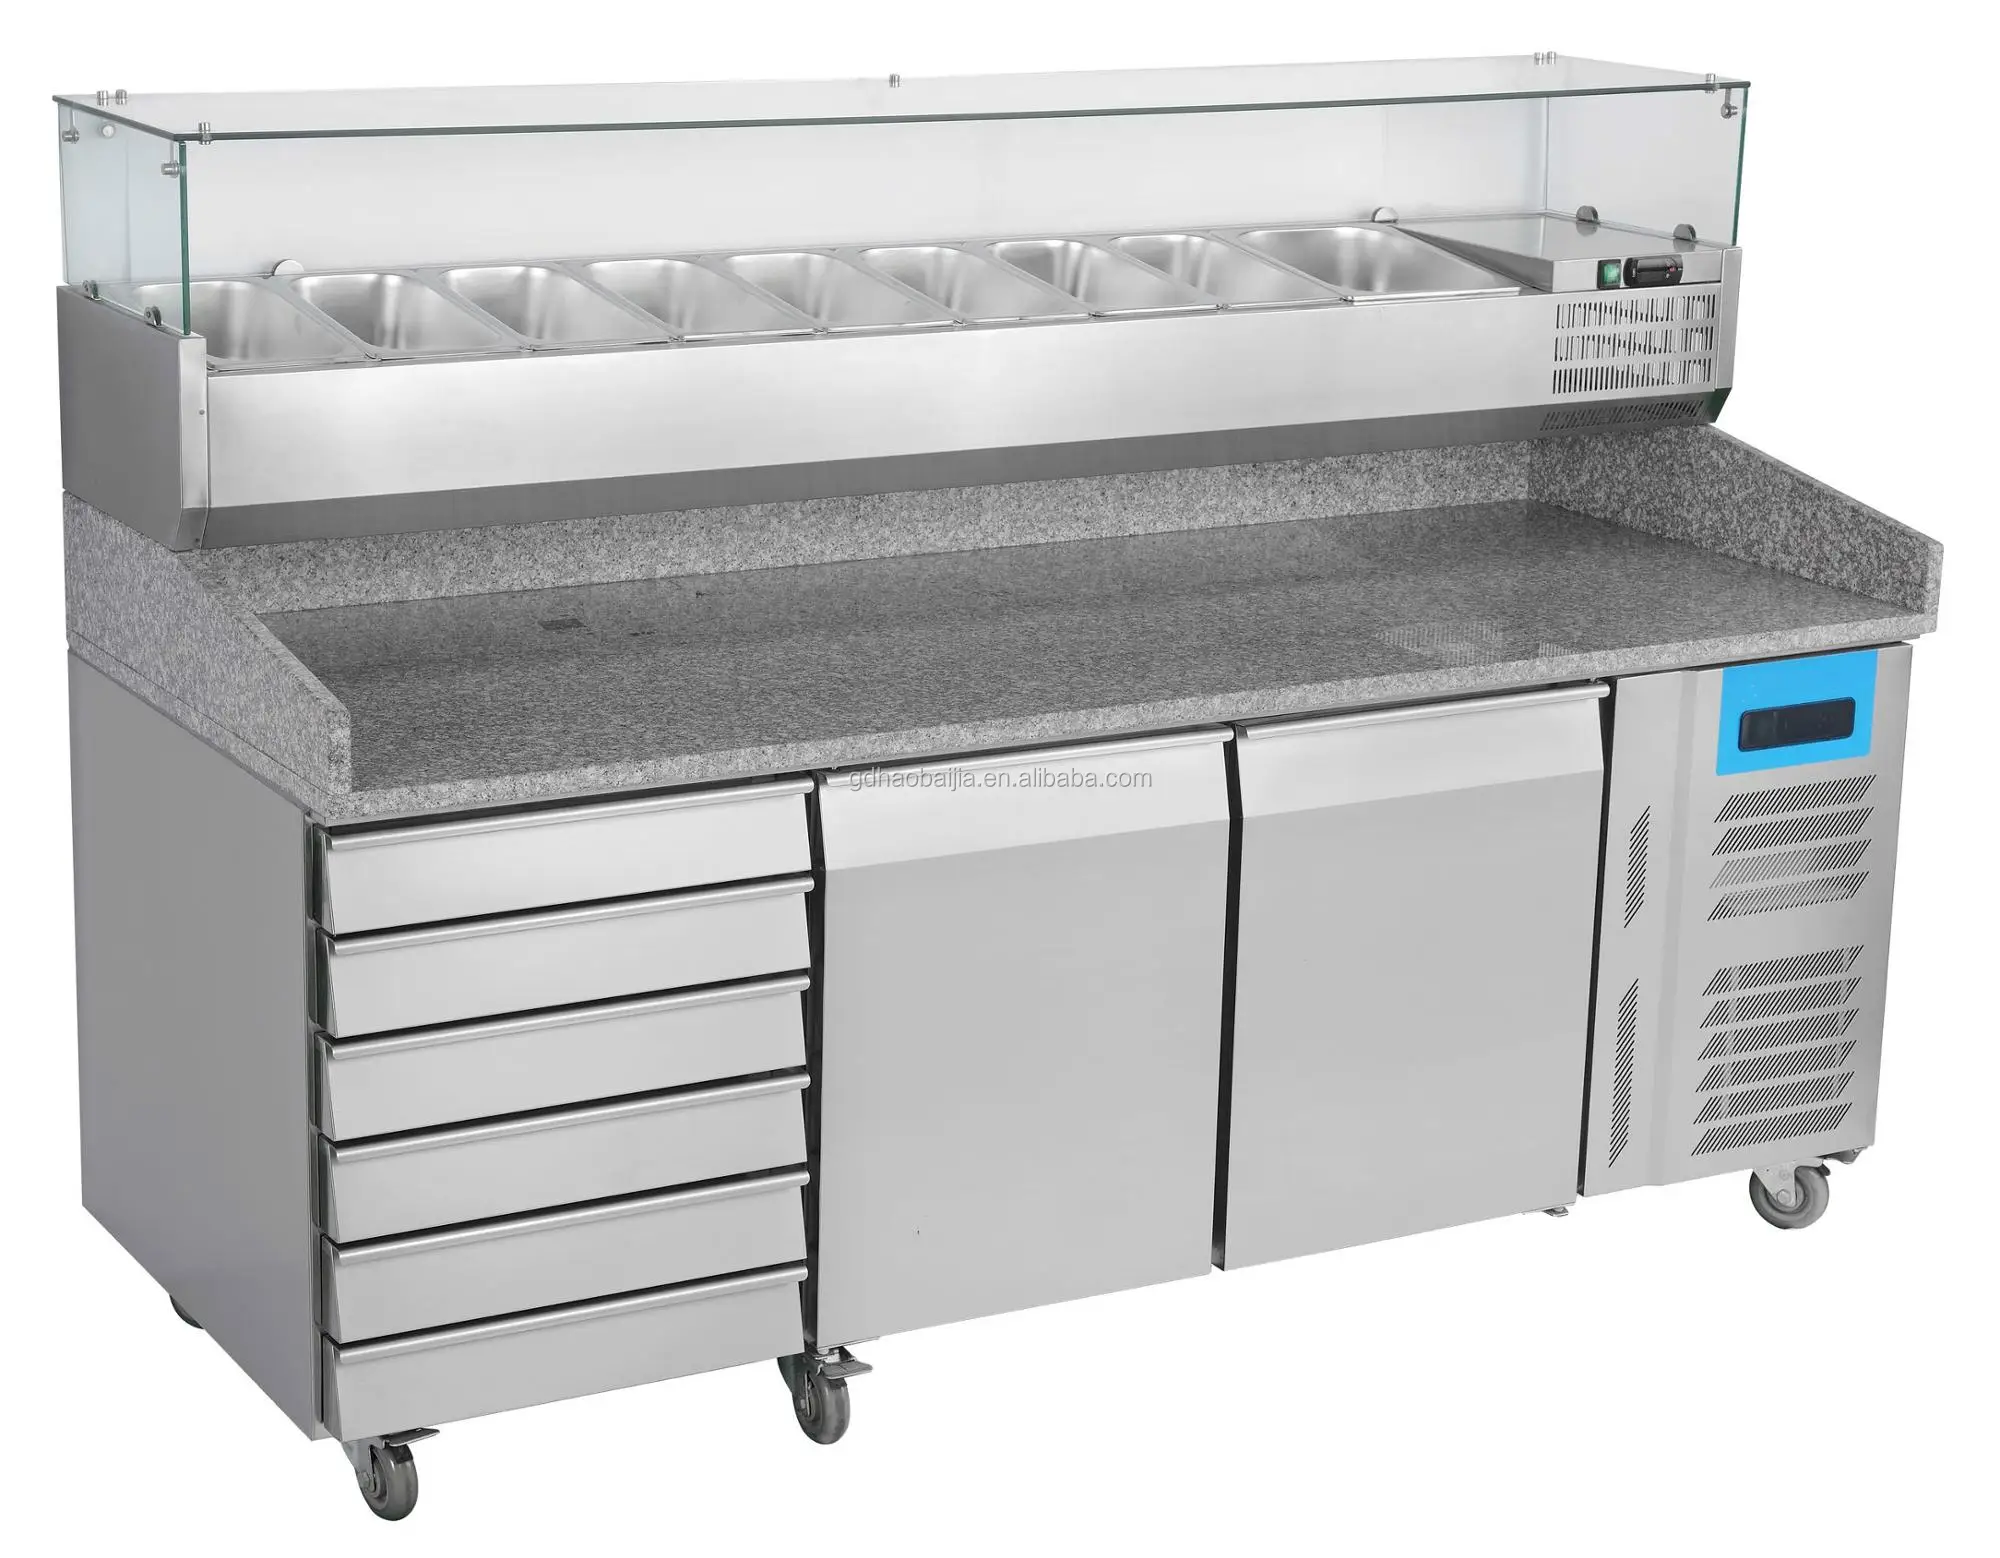 Stainless Steel Pizza Prep Table Fridge With Marble Countertop